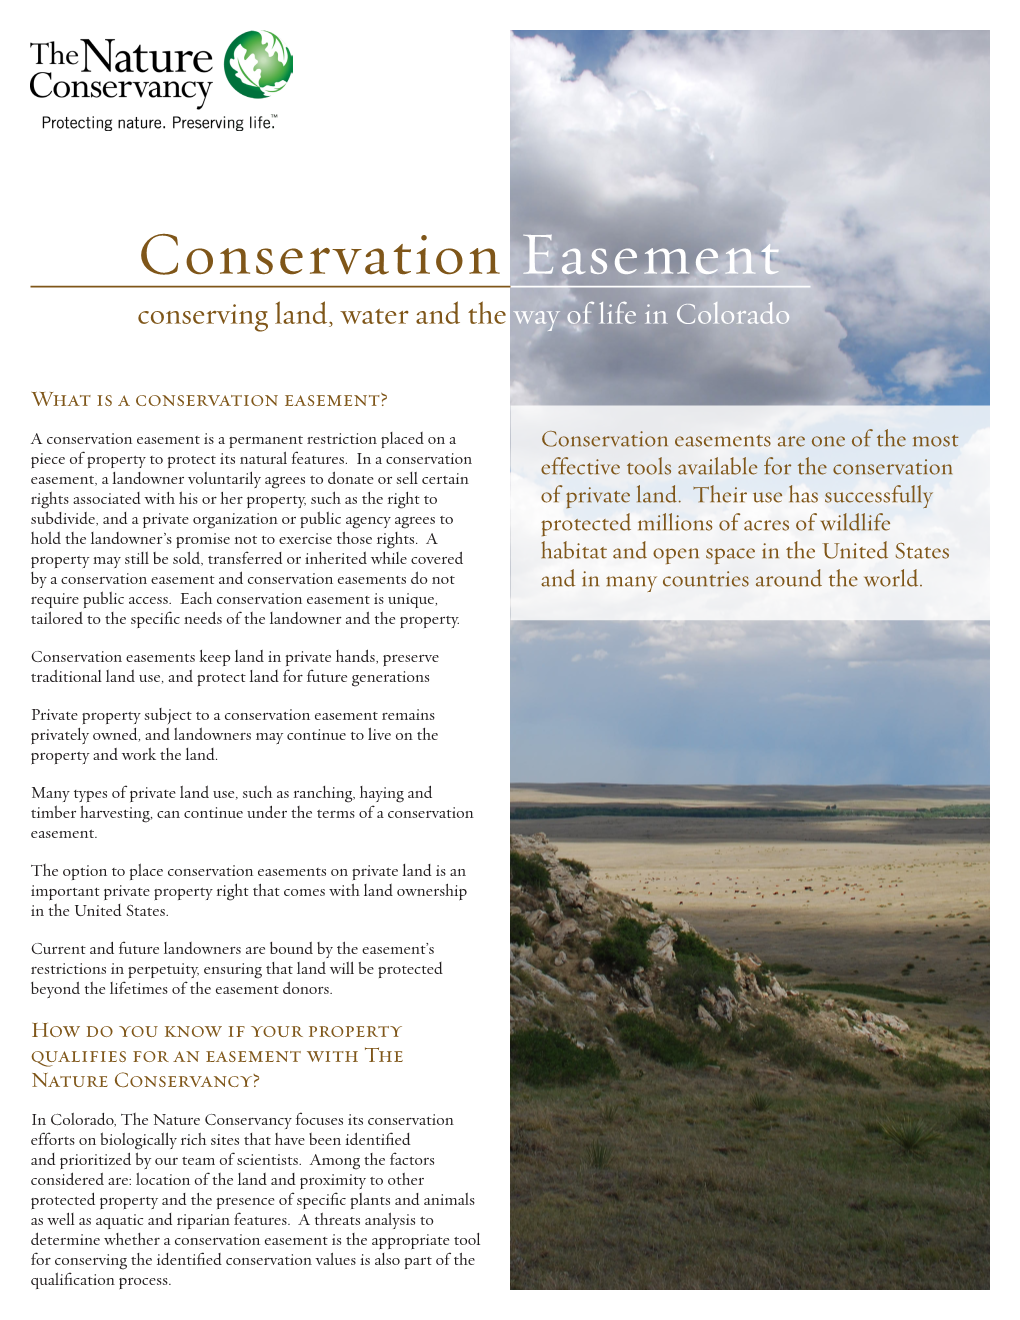 Conservation Easement Conserving Land, Water and the Way of Life in Colorado